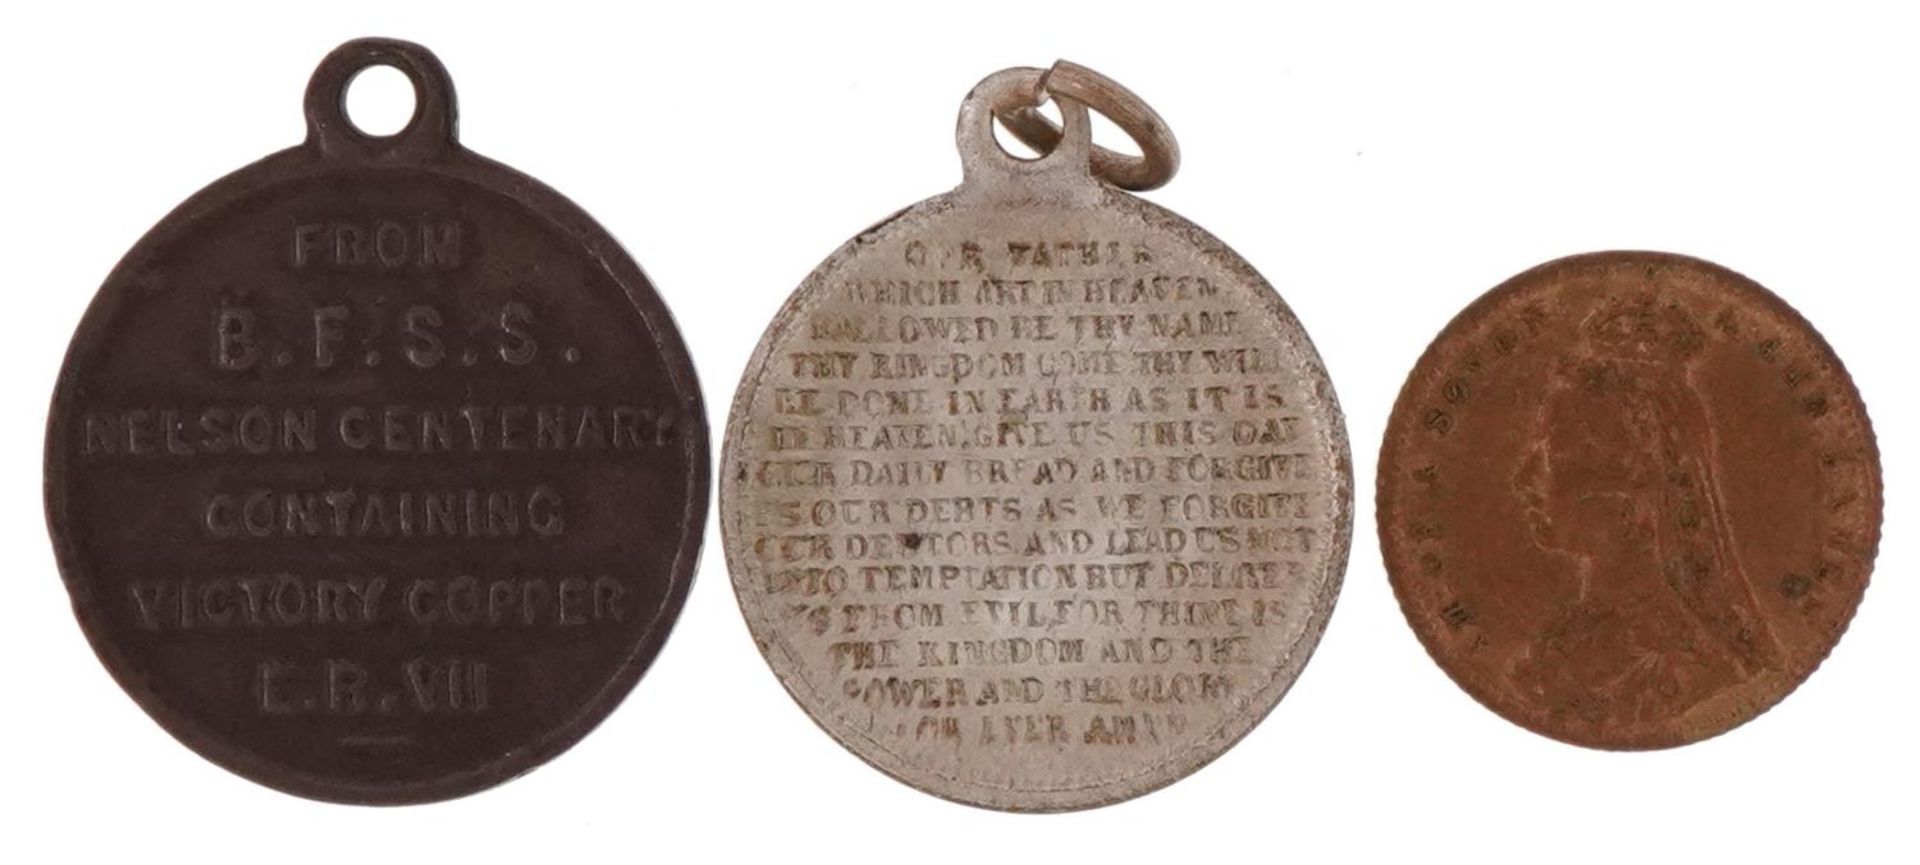 Two commemorative medallions and a coin including naval interest Nelson's Centenary containing - Image 2 of 2